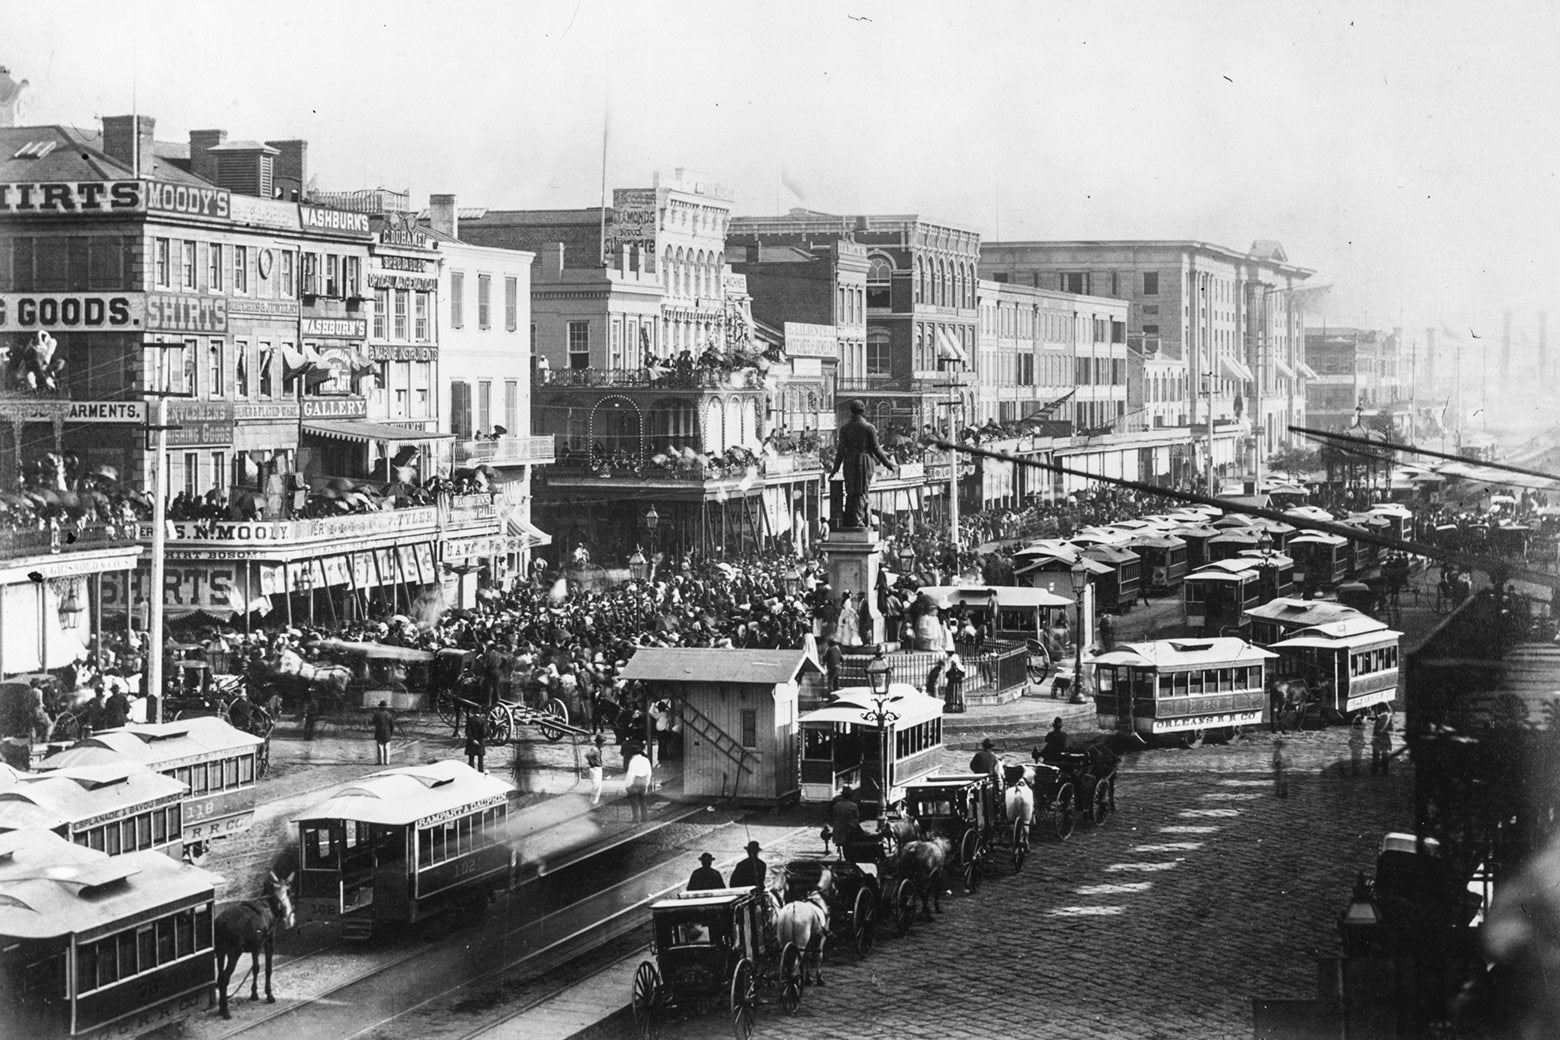 A view of a busy 19th-century street in New Orleans